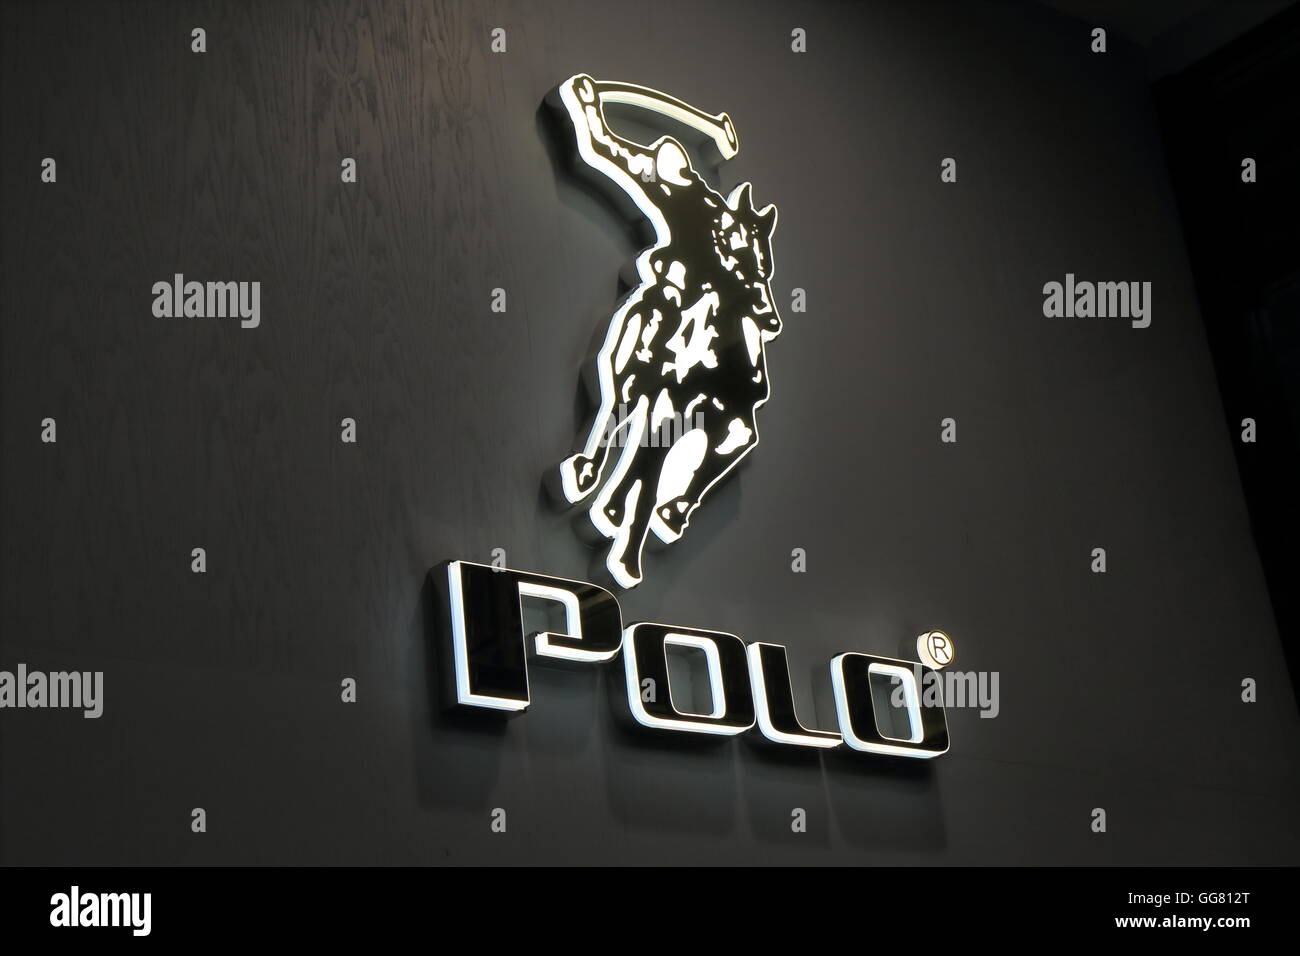 Polo Logo High Resolution Stock Photography and Images - Alamy